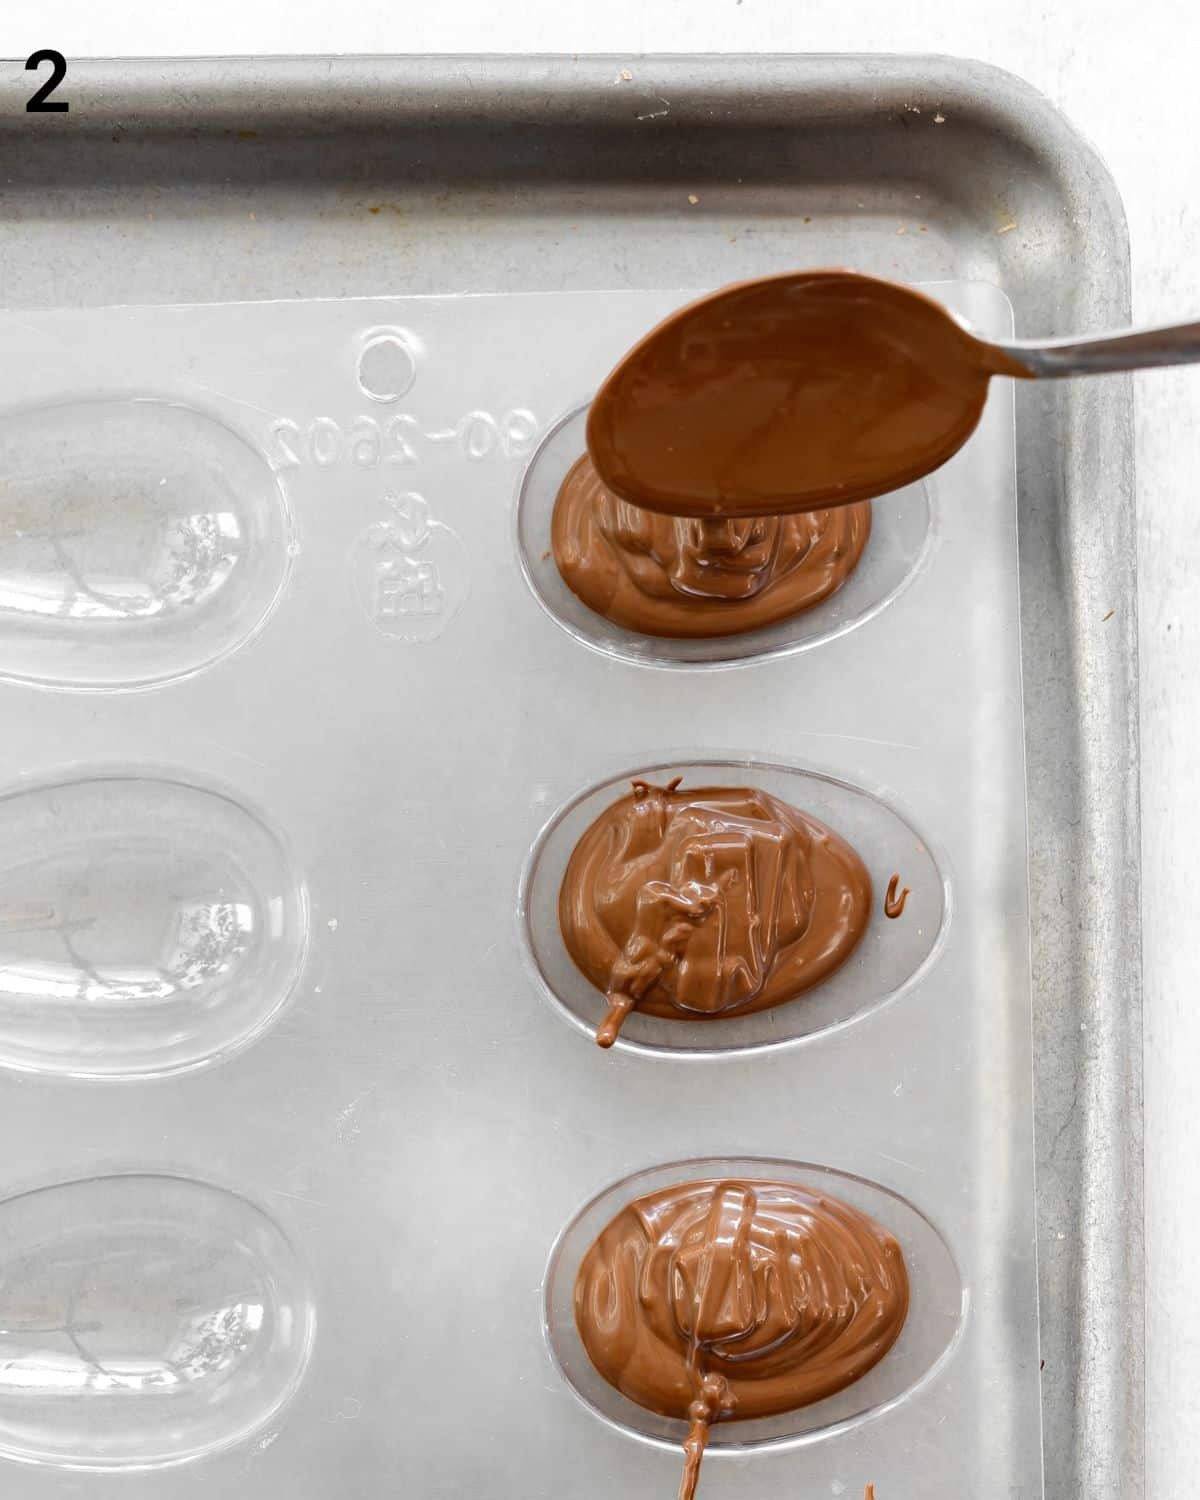 melted chocolate in easter egg molds.